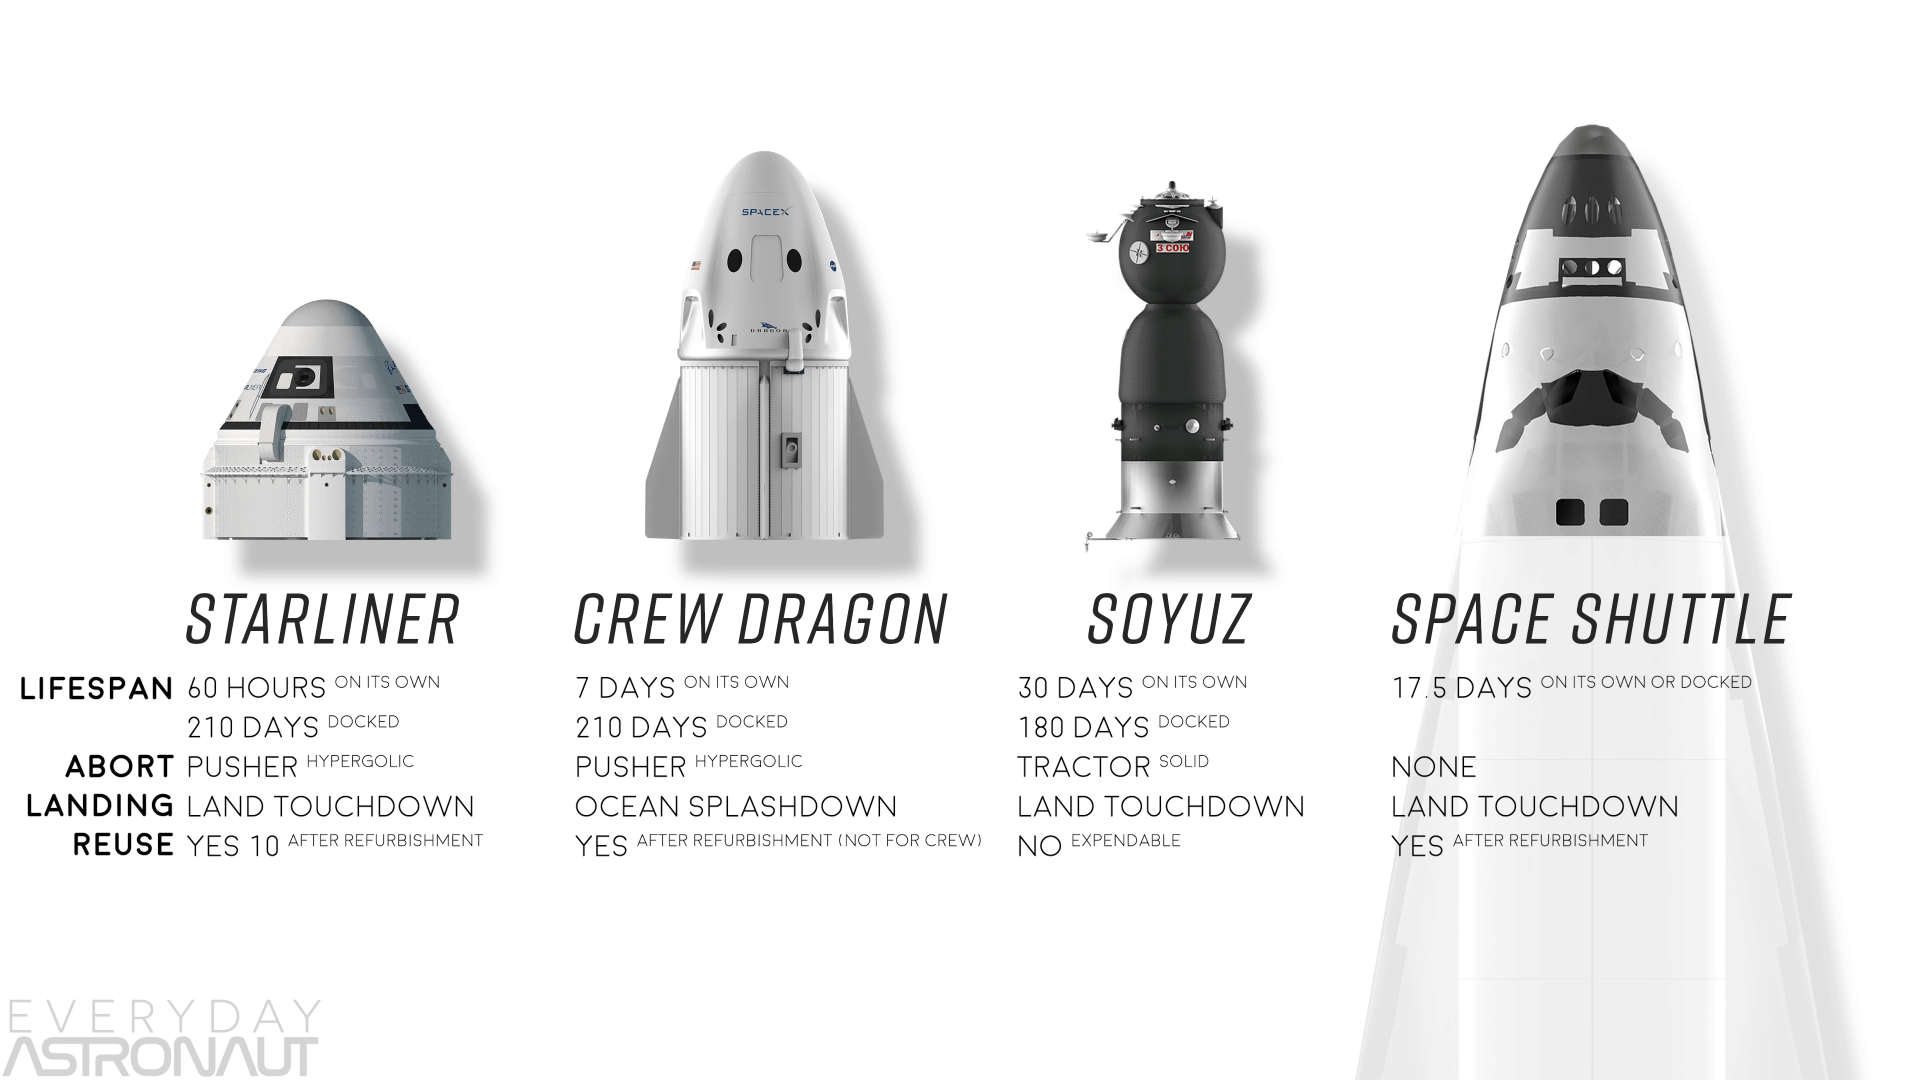 Dragon 2 DM 2: SpaceX's First Crewed Mission